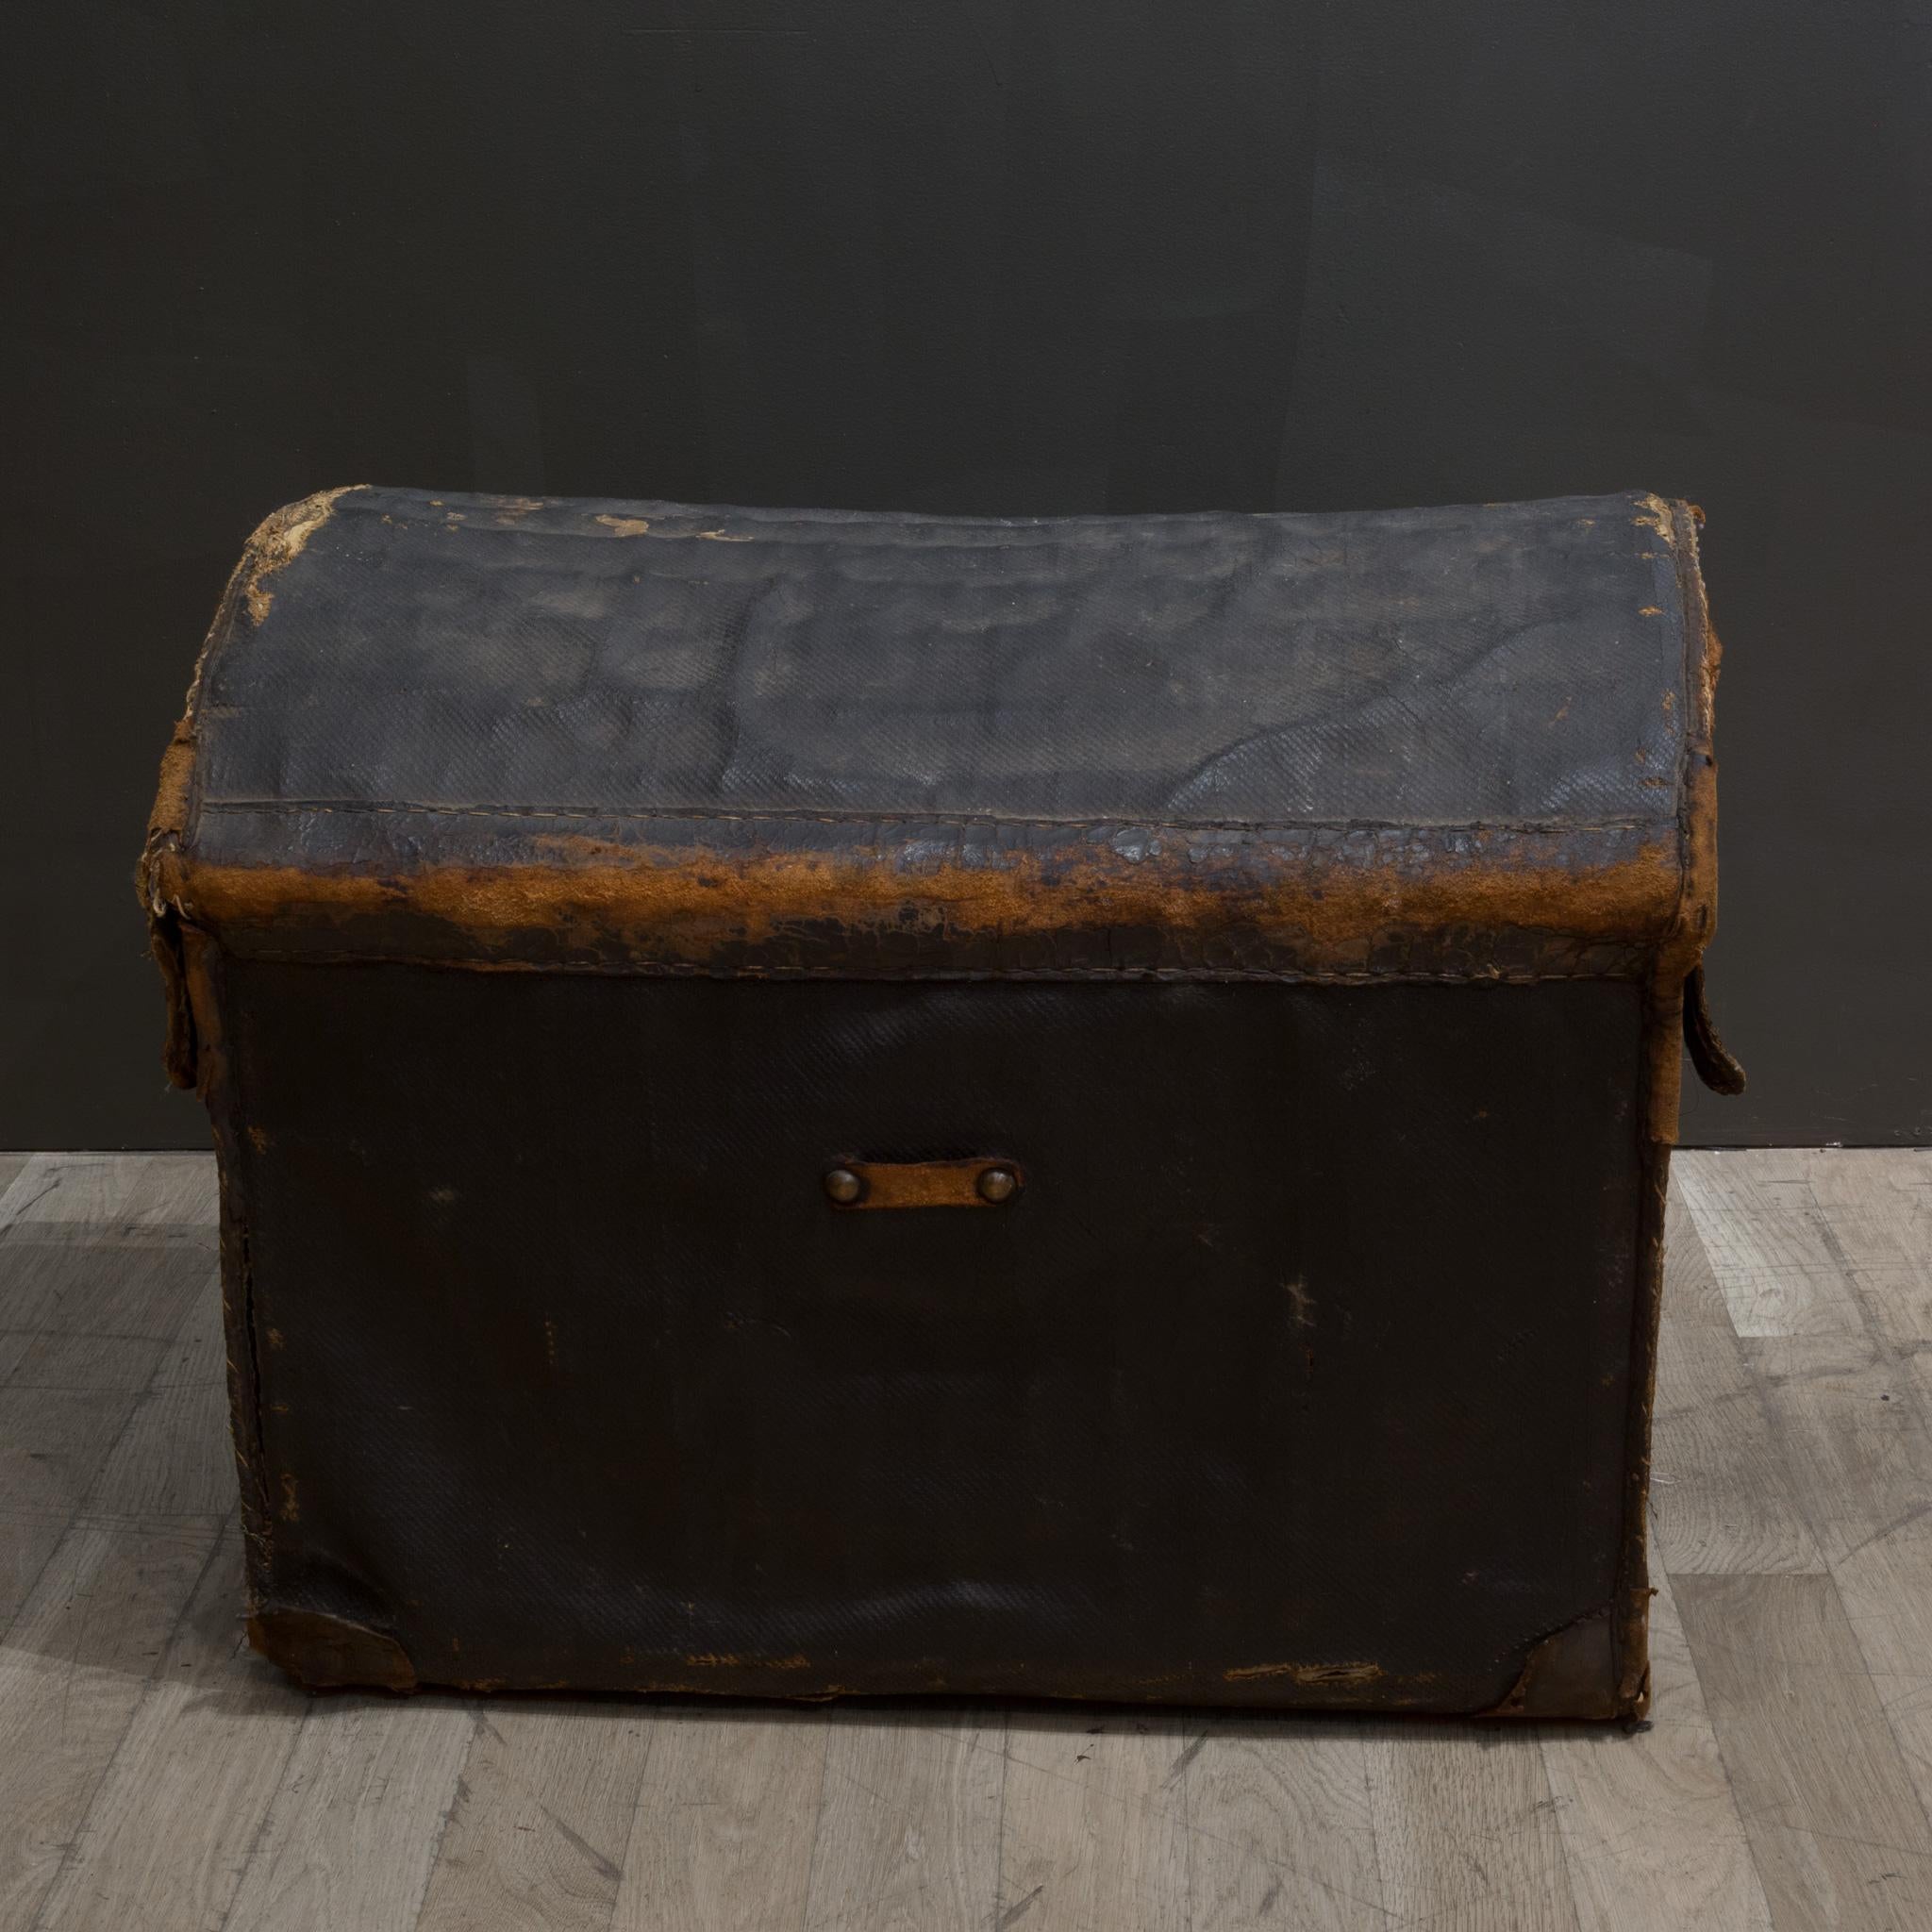 Leather Mid 19th c. English Canvas Dome Travel Trunk c.1850